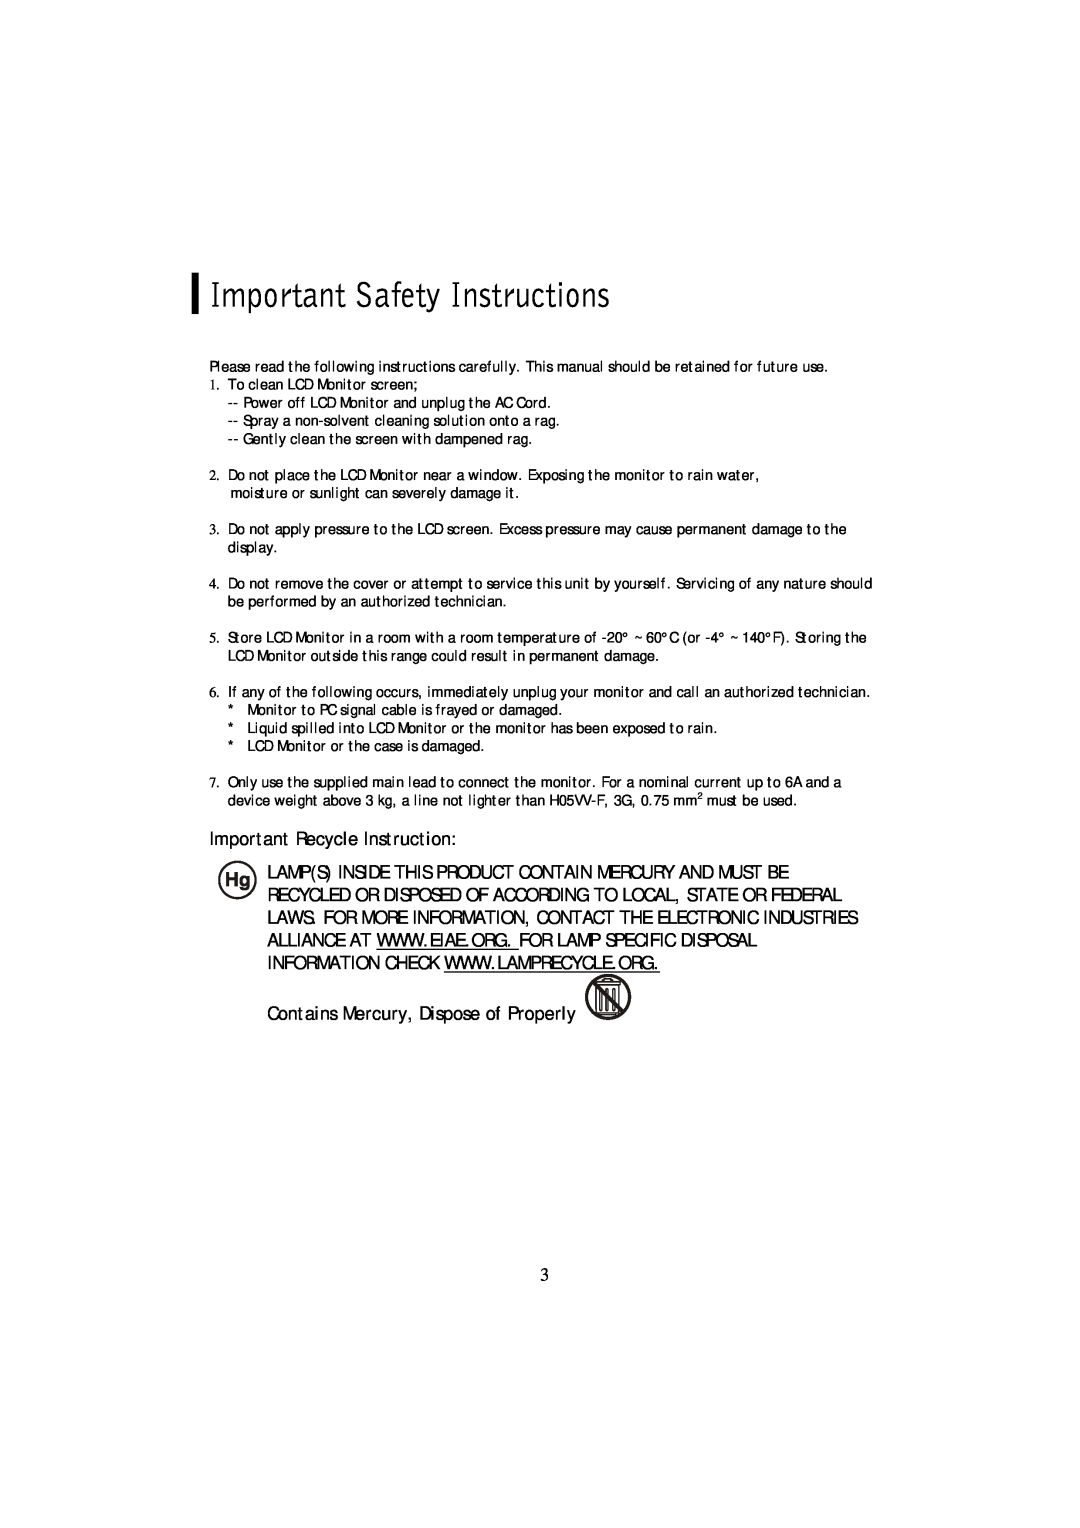 Planar PL2011MW manual Important Safety Instructions, Important Recycle Instruction, Contains Mercury, Dispose of Properly 